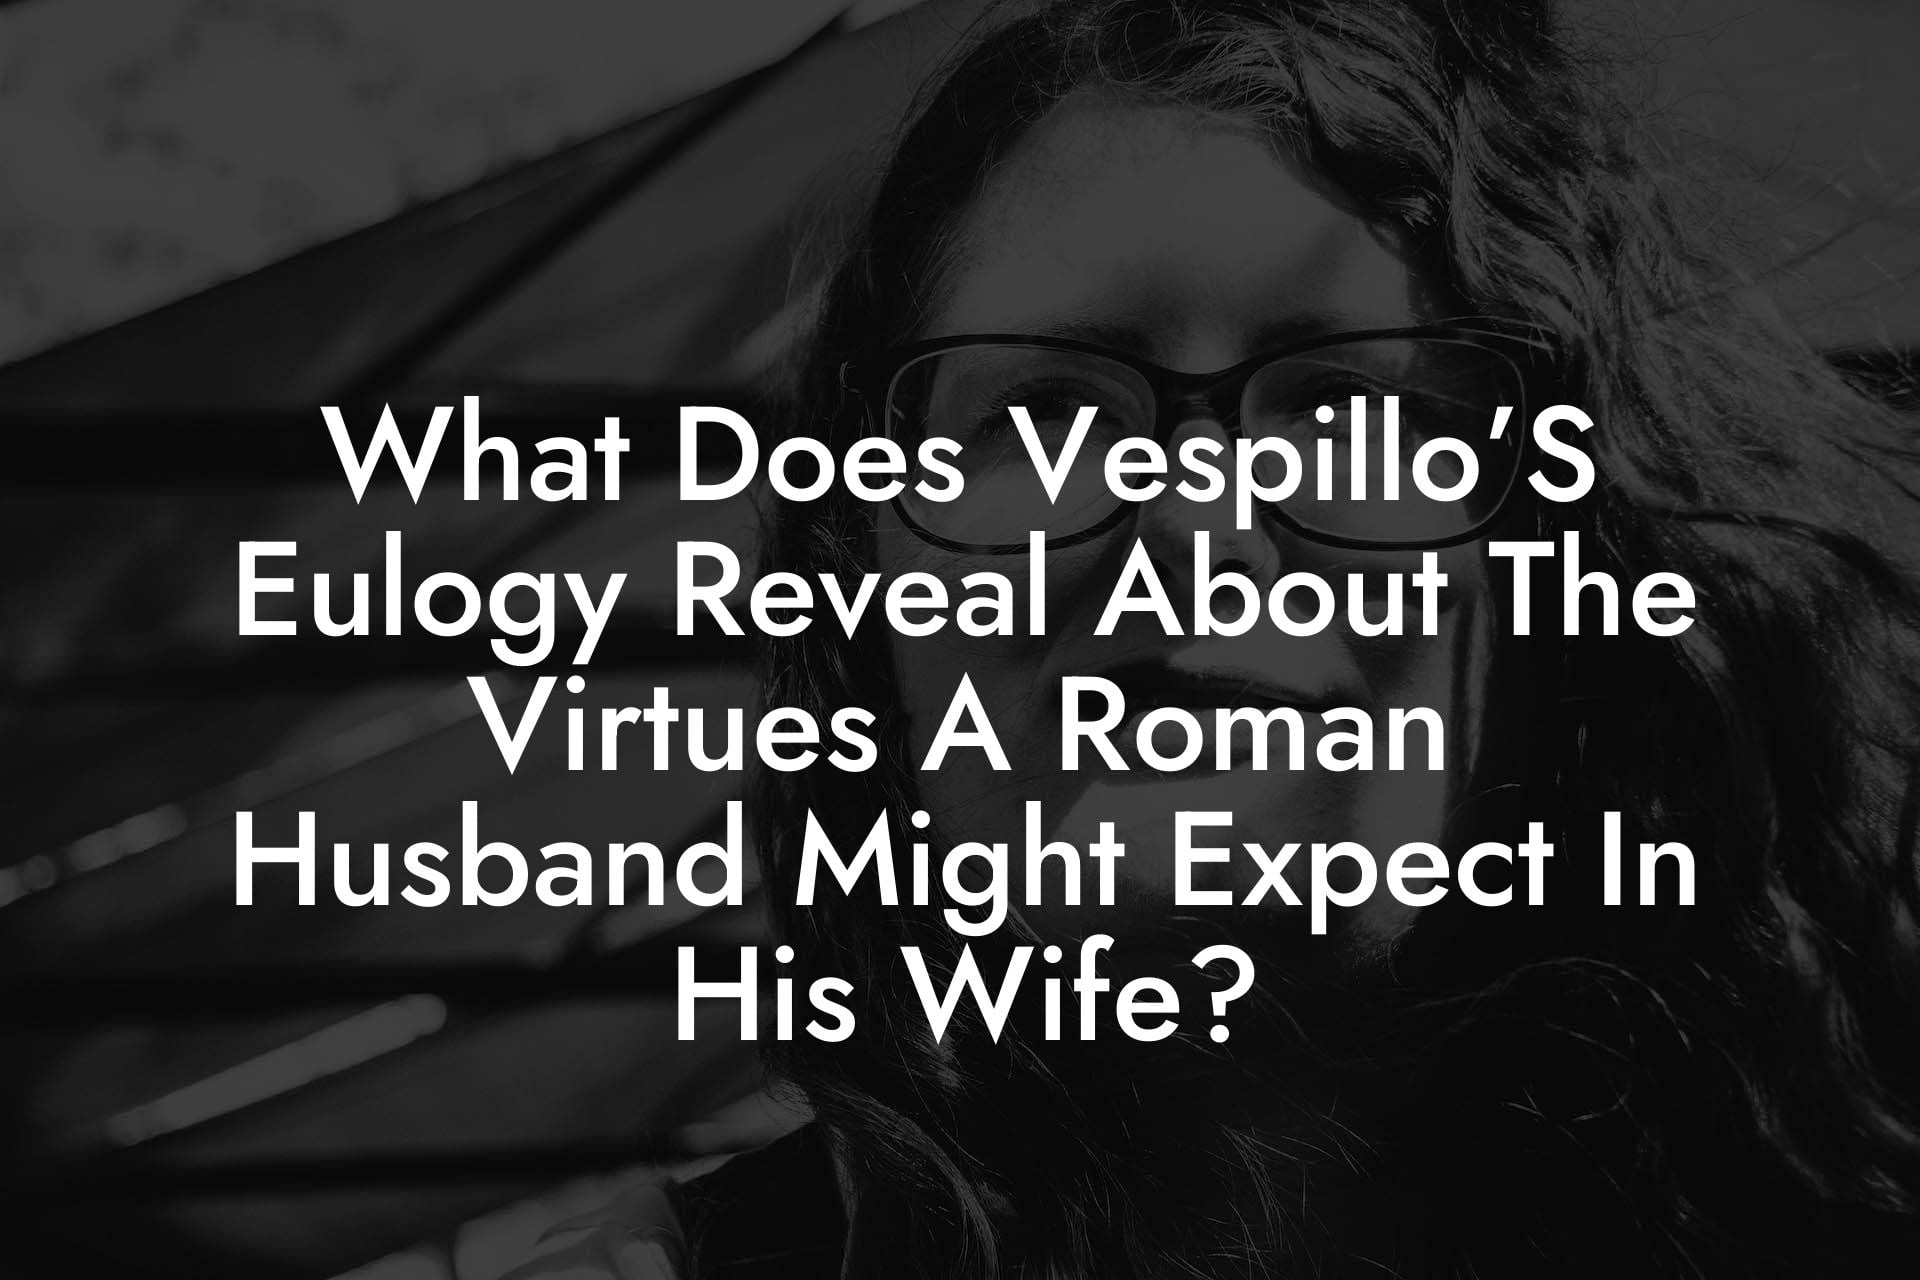 What Does Vespillo’S Eulogy Reveal About The Virtues A Roman Husband Might Expect In His Wife?